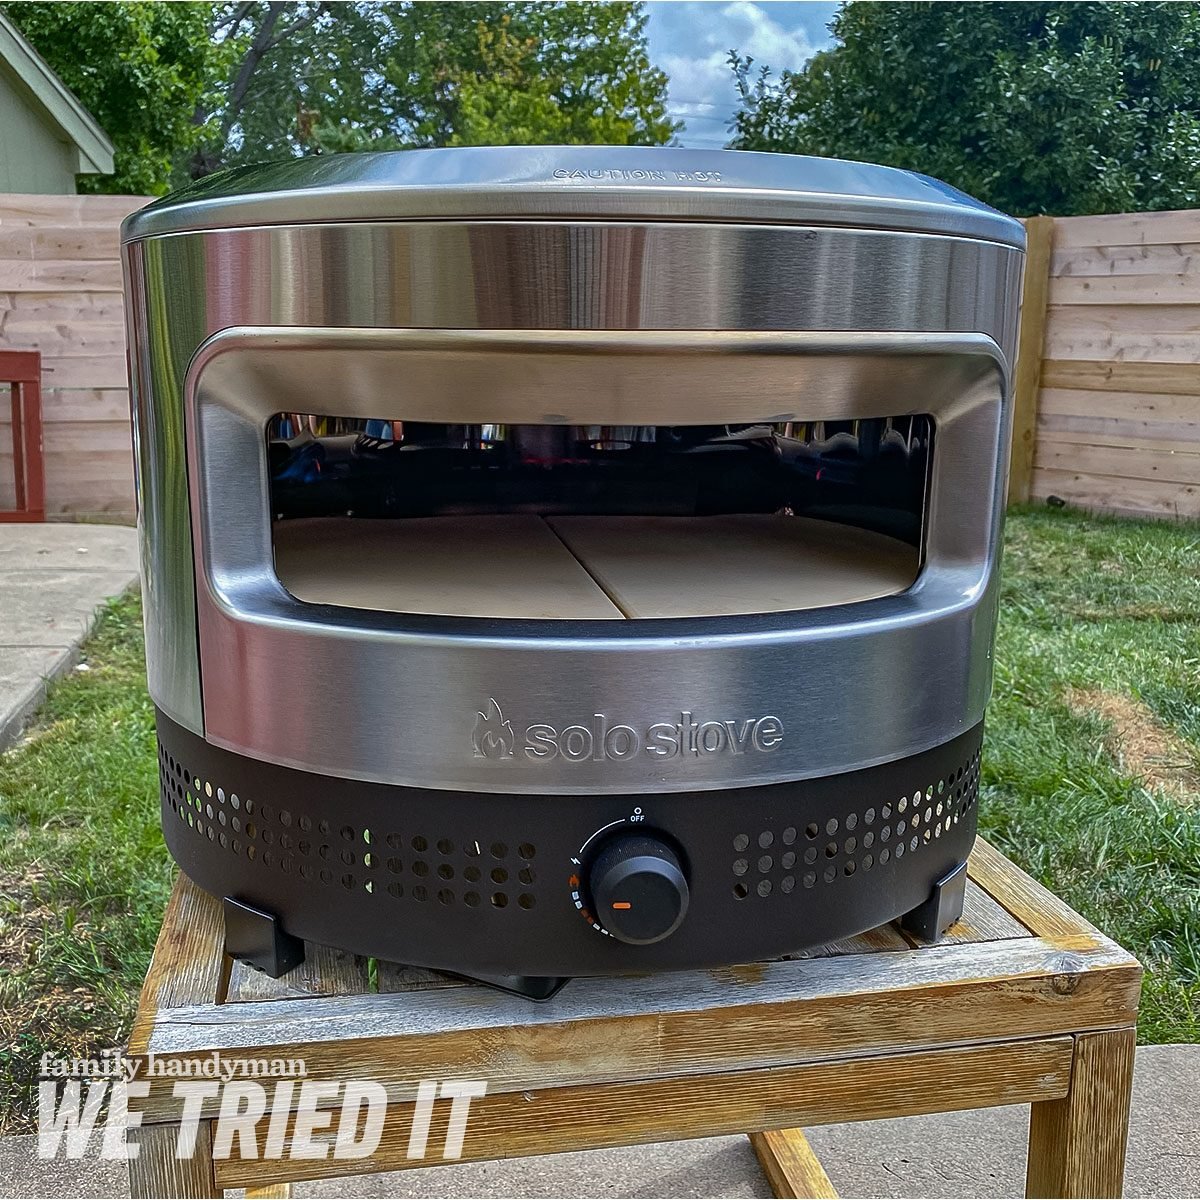 Solo Stove Pi Prime Review: Is it An Affordable Home Pizza Oven? (We Tried It)